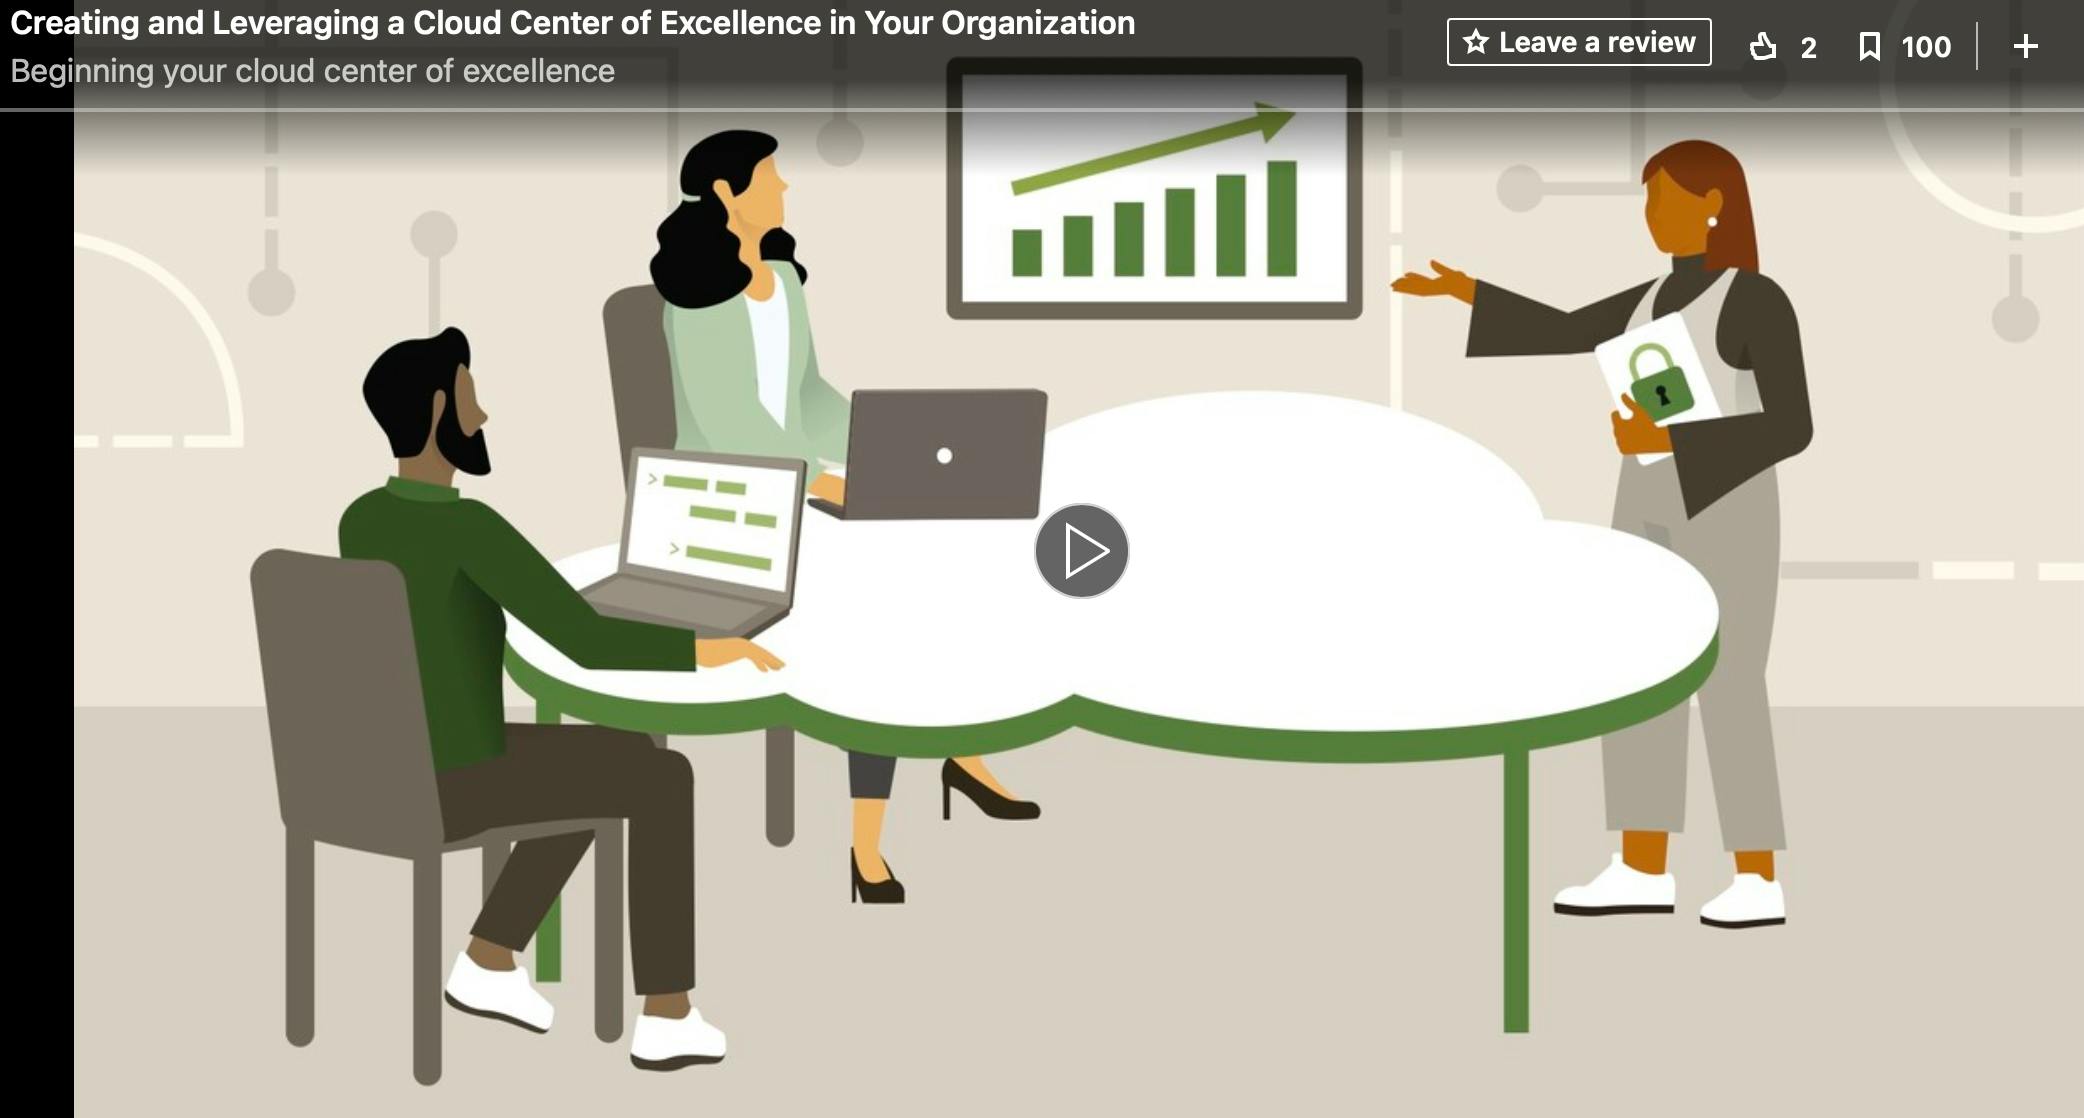 Creating and Leveraging a Cloud Center of Excellence in Your Organization